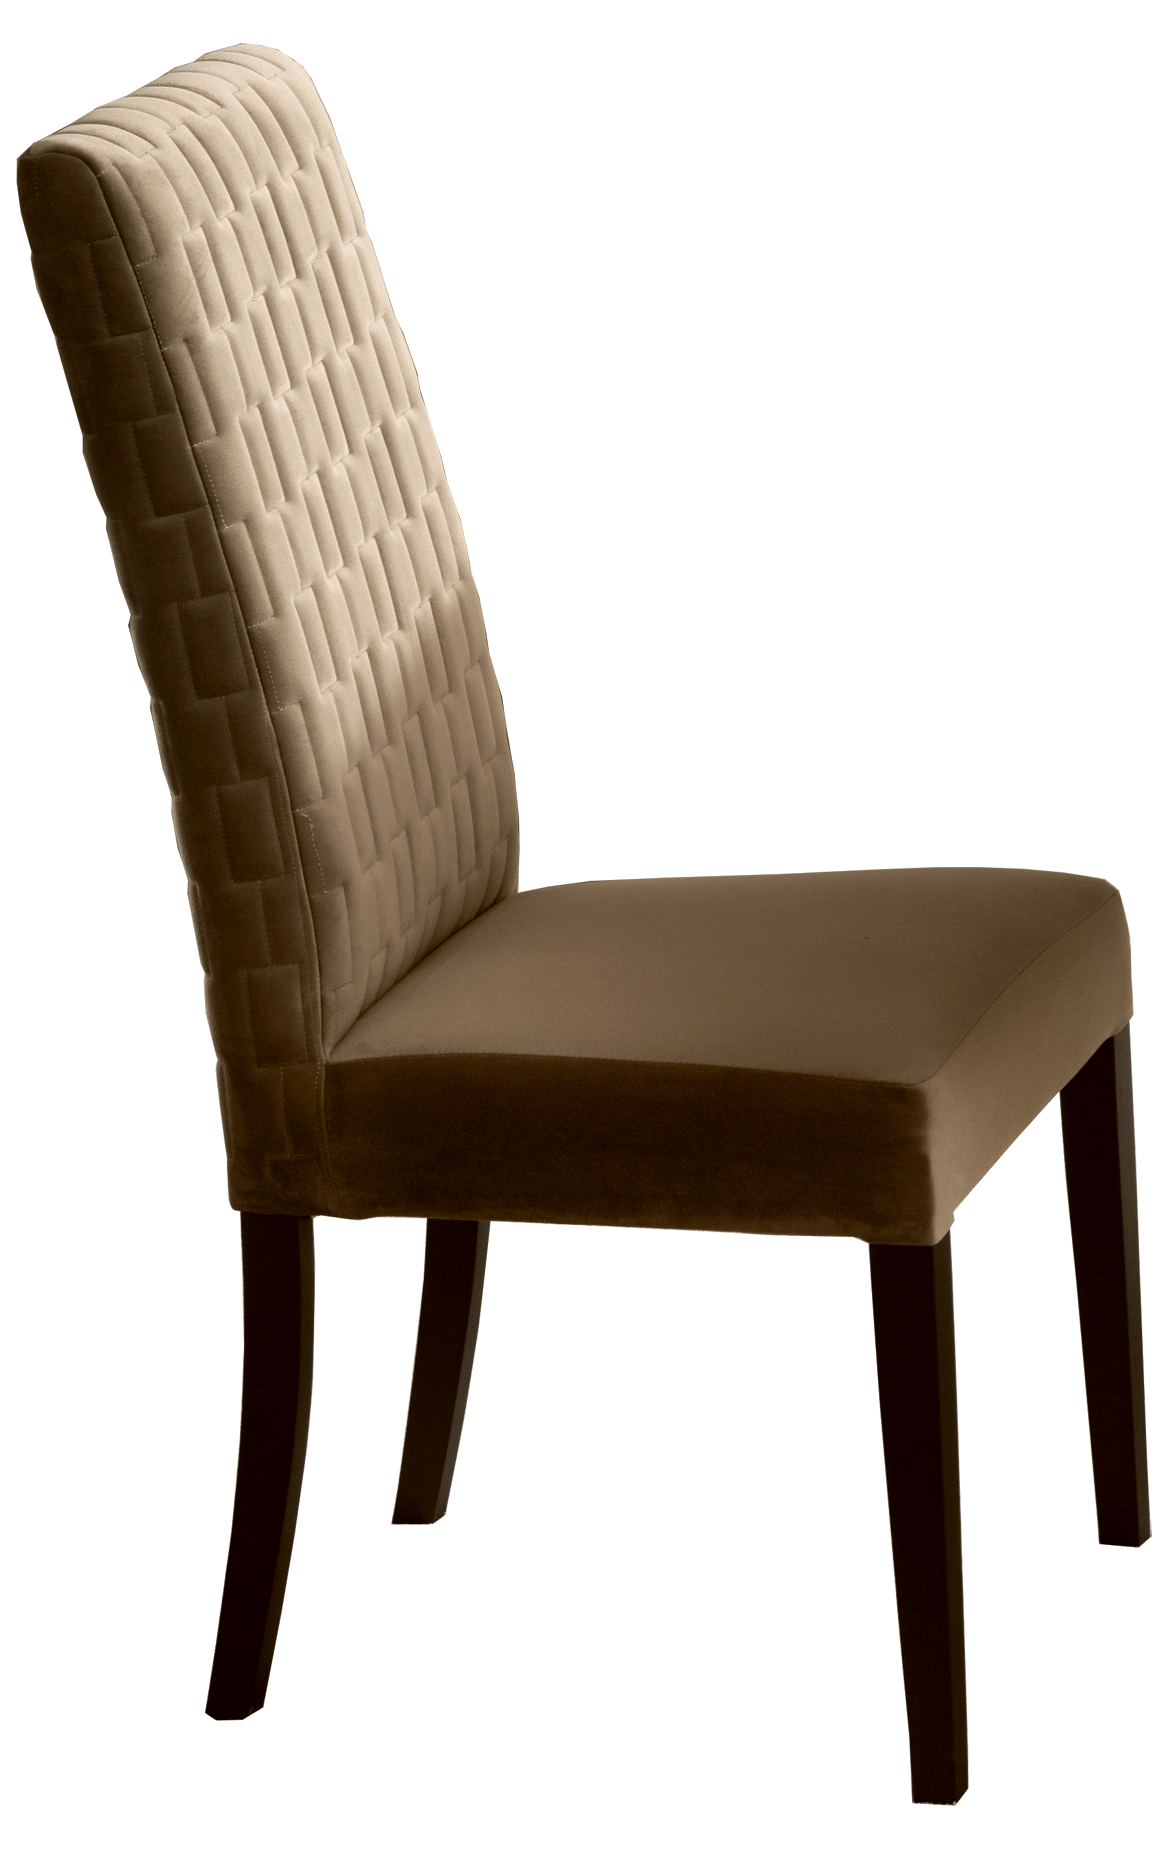 Brands Arredoclassic Bedroom, Italy Poesia Dining Chair by Arredoclassic